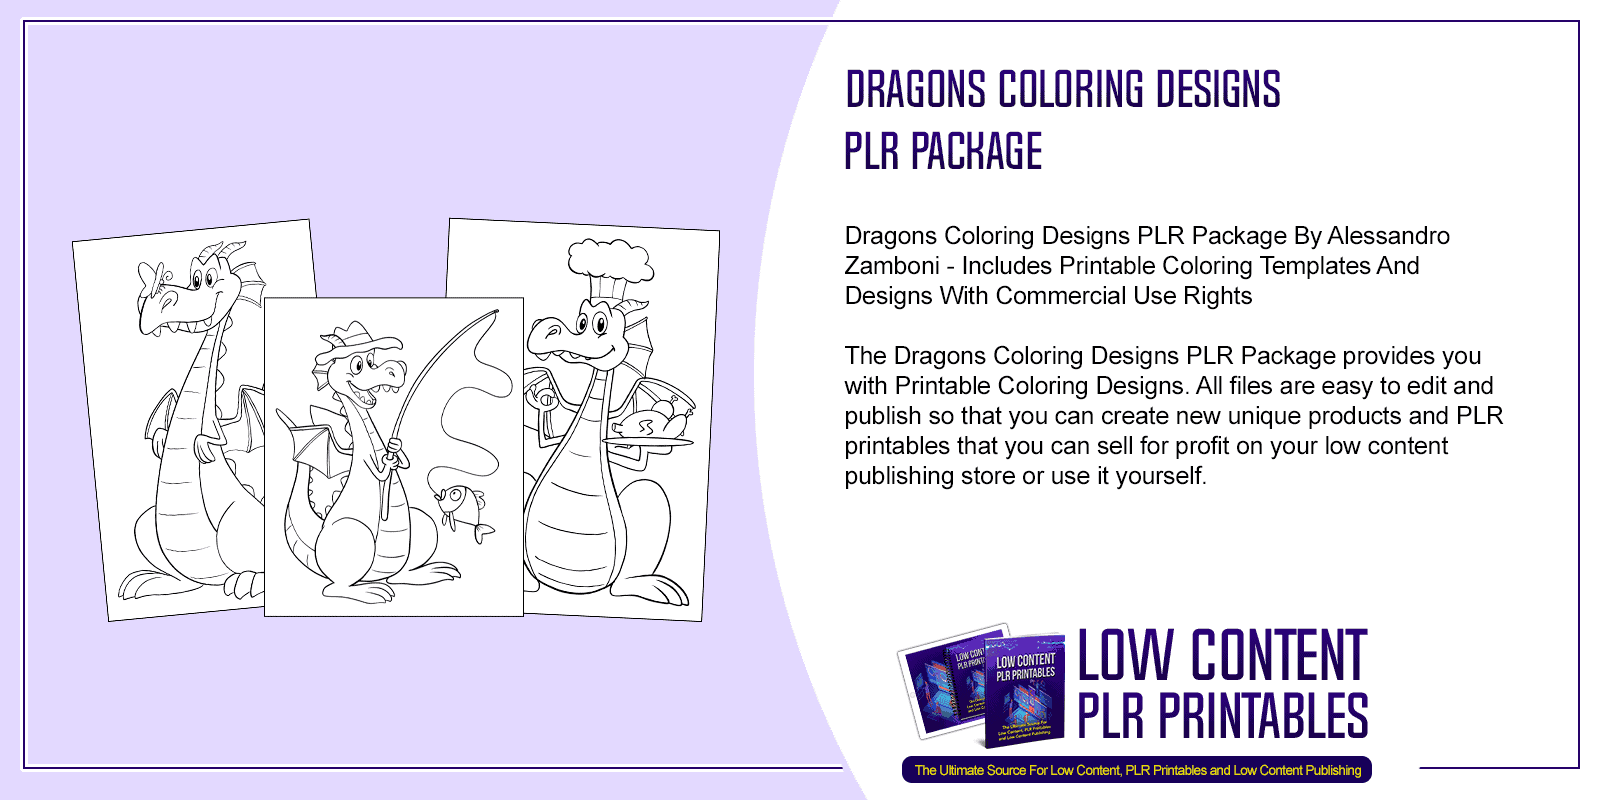 Dragons Coloring Designs PLR Package